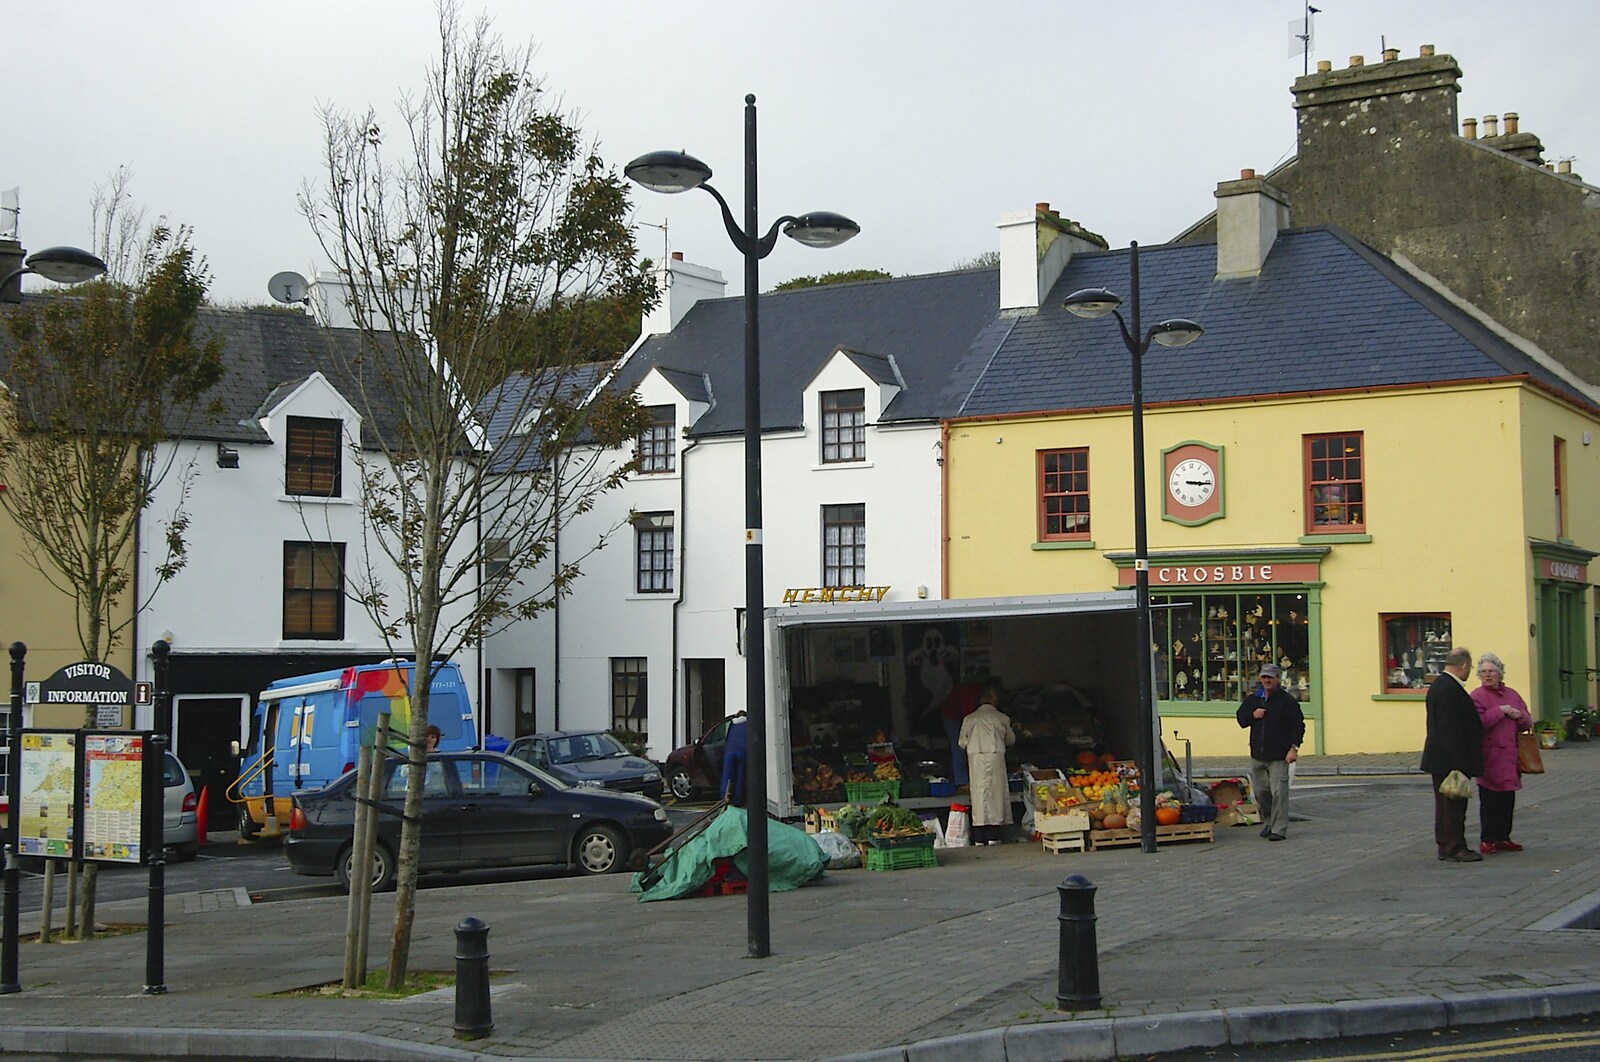 A fruit and vegetable stall from Corofin, Ennistymon and The Burran, County Clare, Western Ireland - 27th October 2006